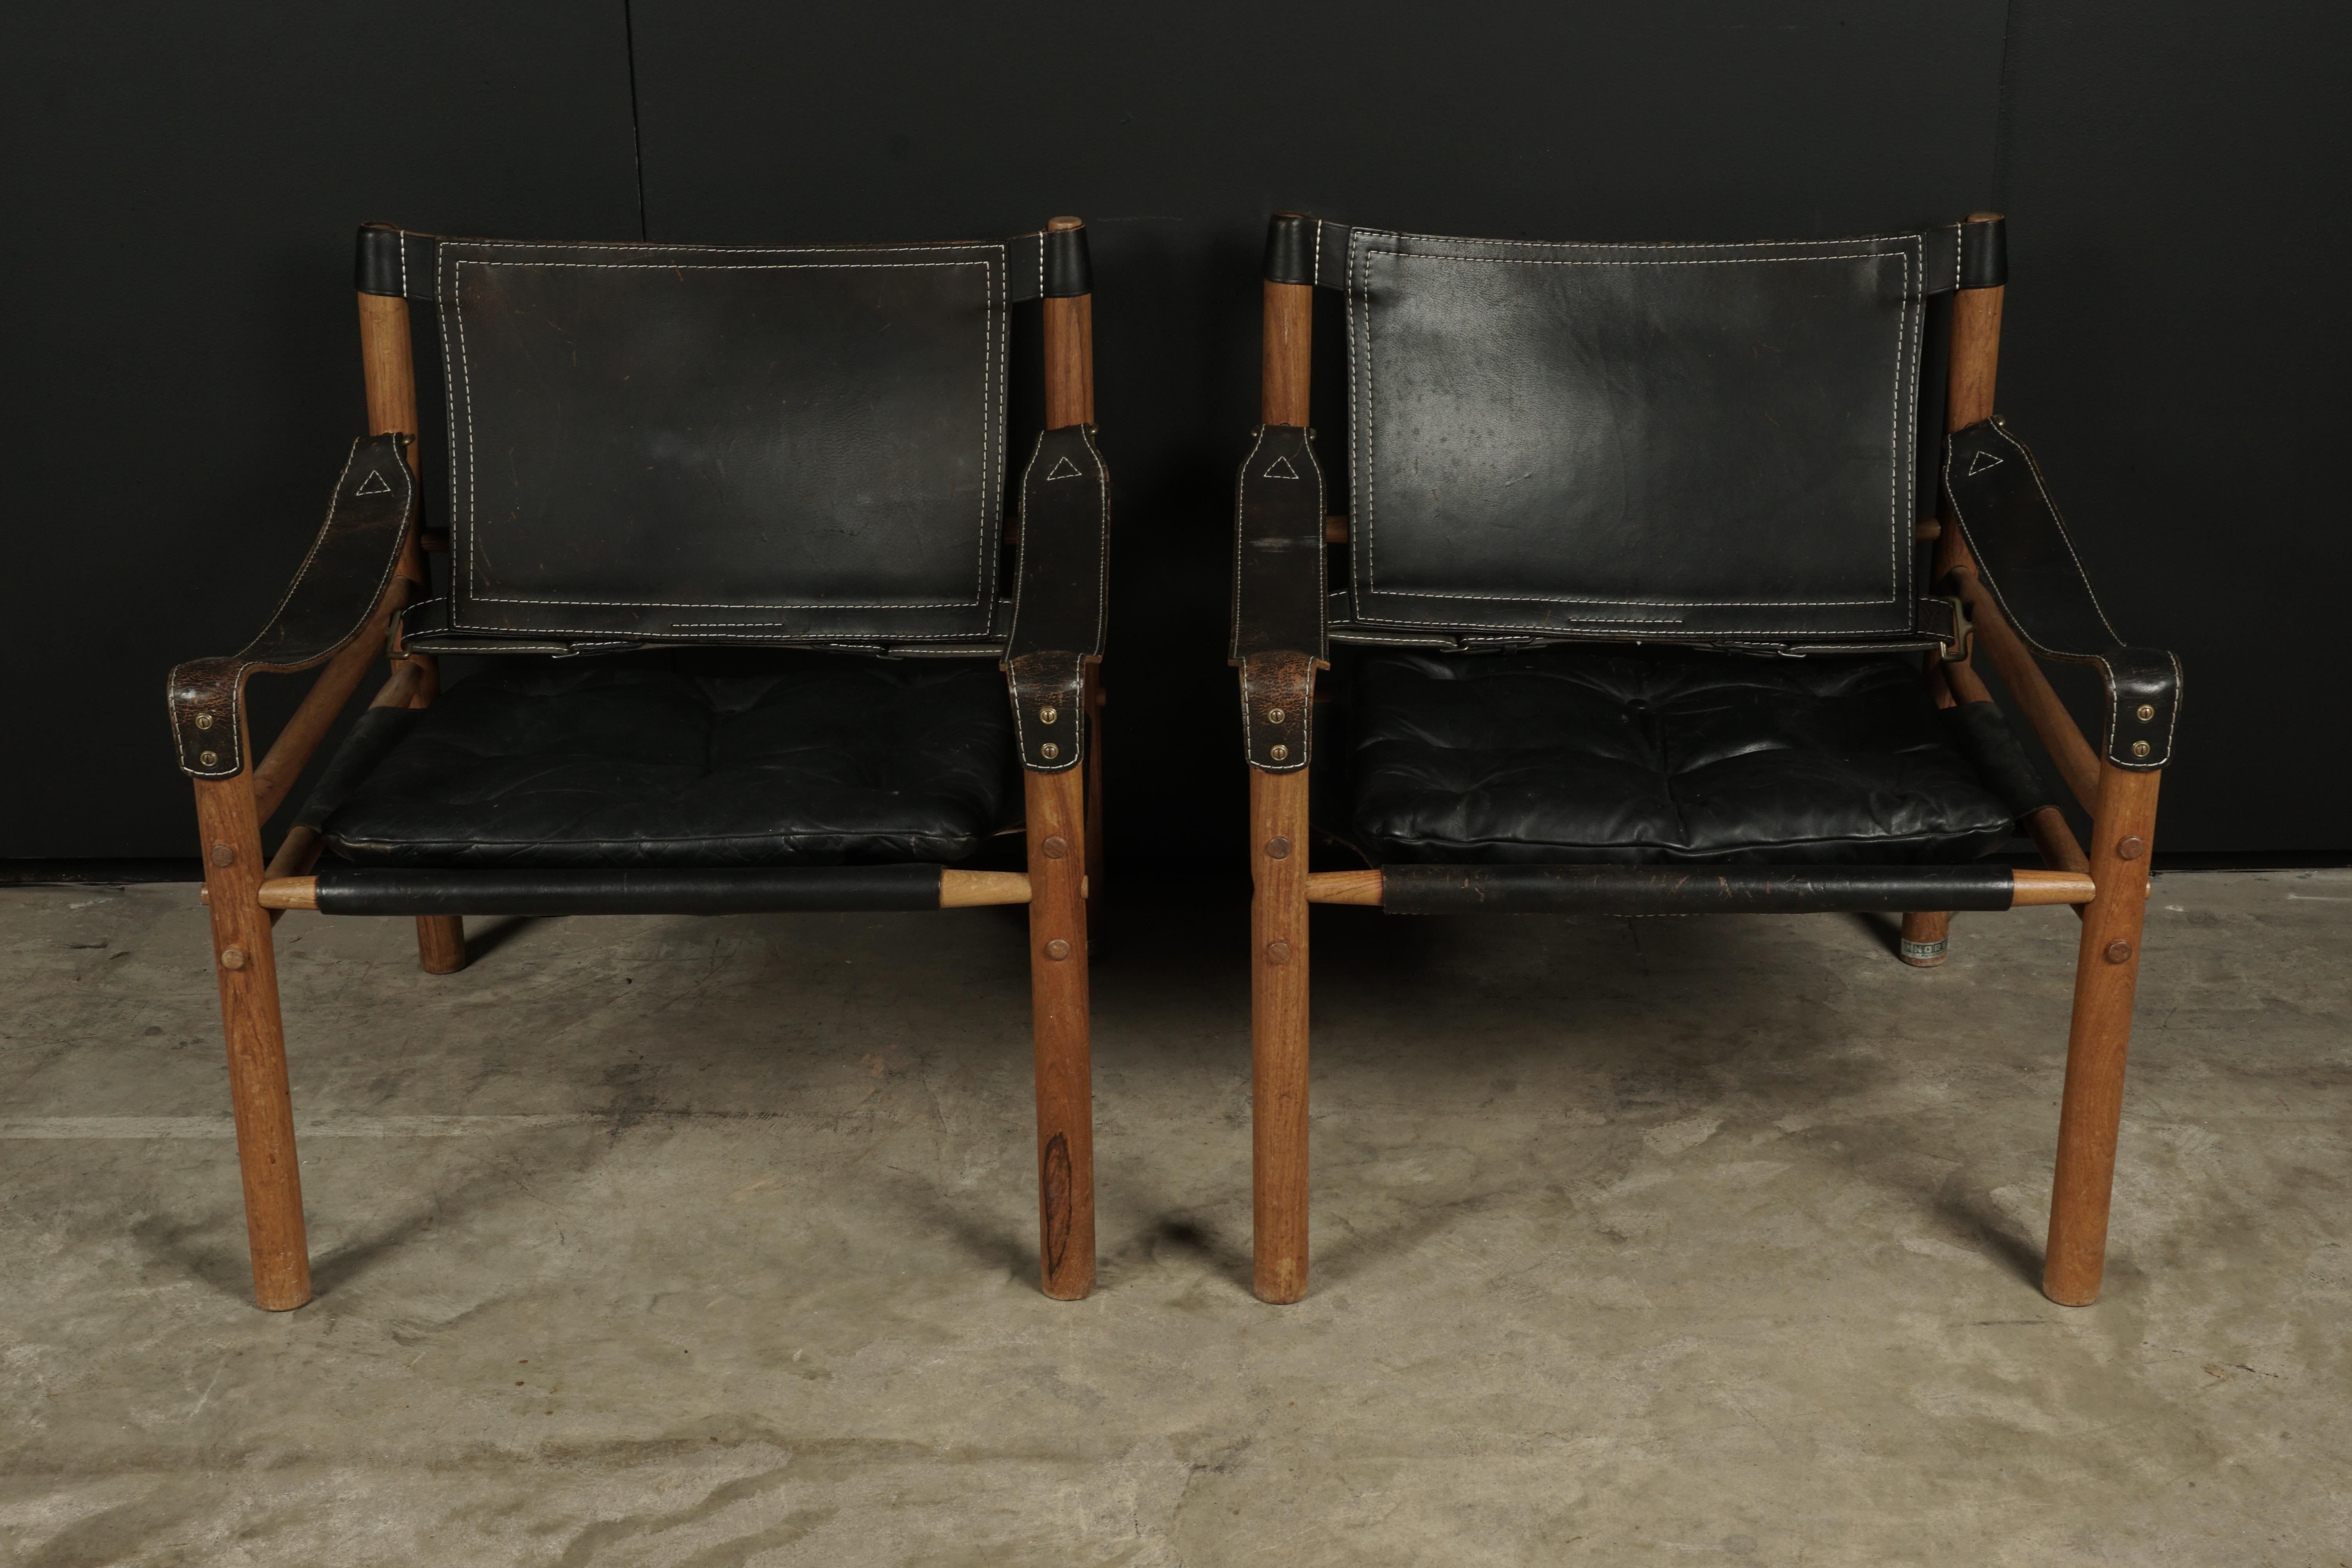 Rare pair of Arne Norell safari lounge chairs, Model Sirocco, Sweden, circa 1970. Original black leather upholstery with light wear and patina.